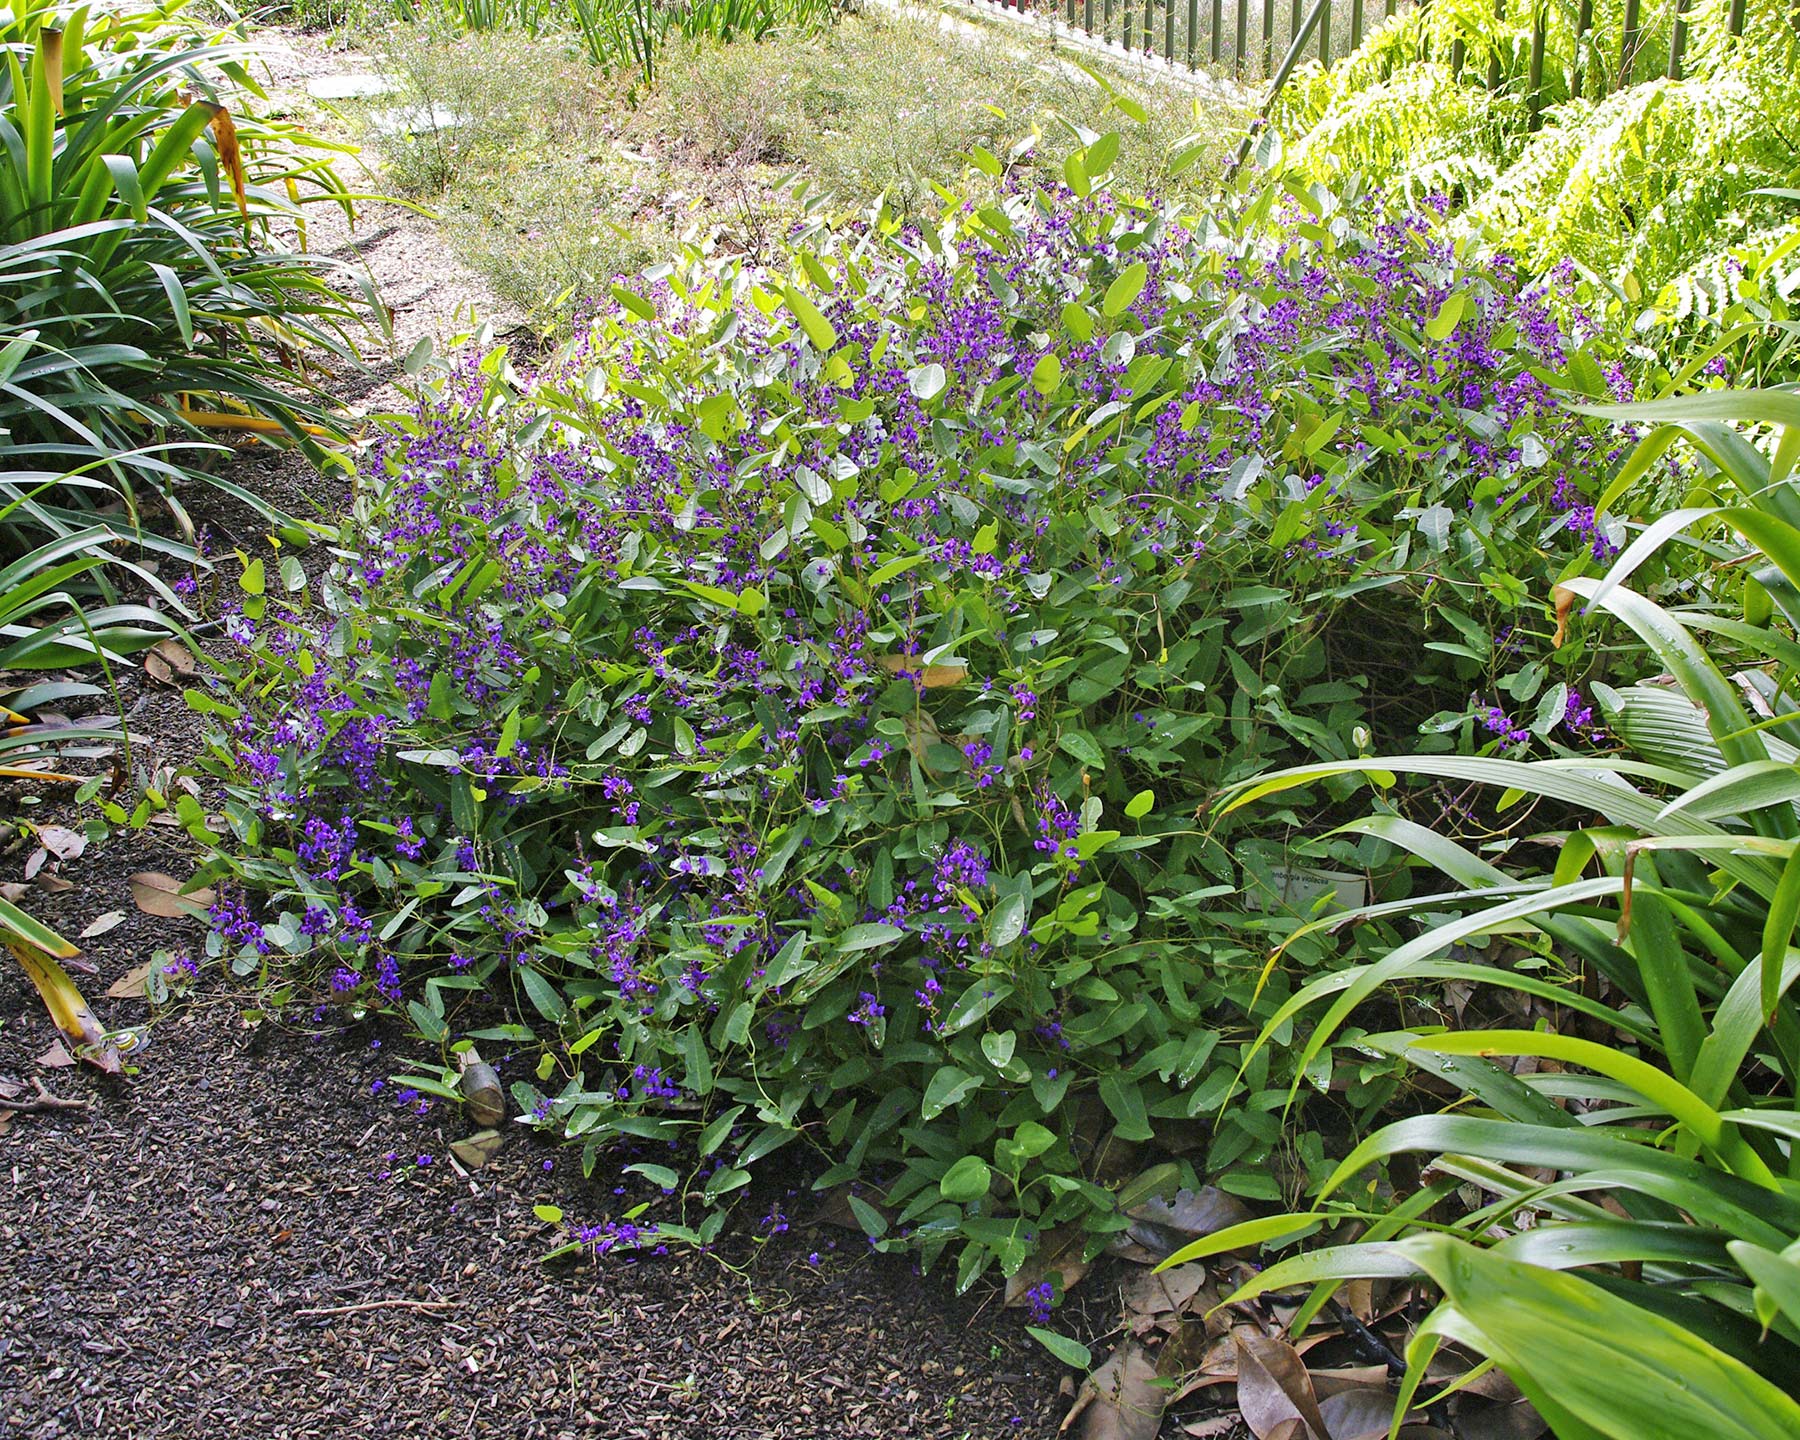 Hardenbergia violacea pruned to keep and more rounded shape